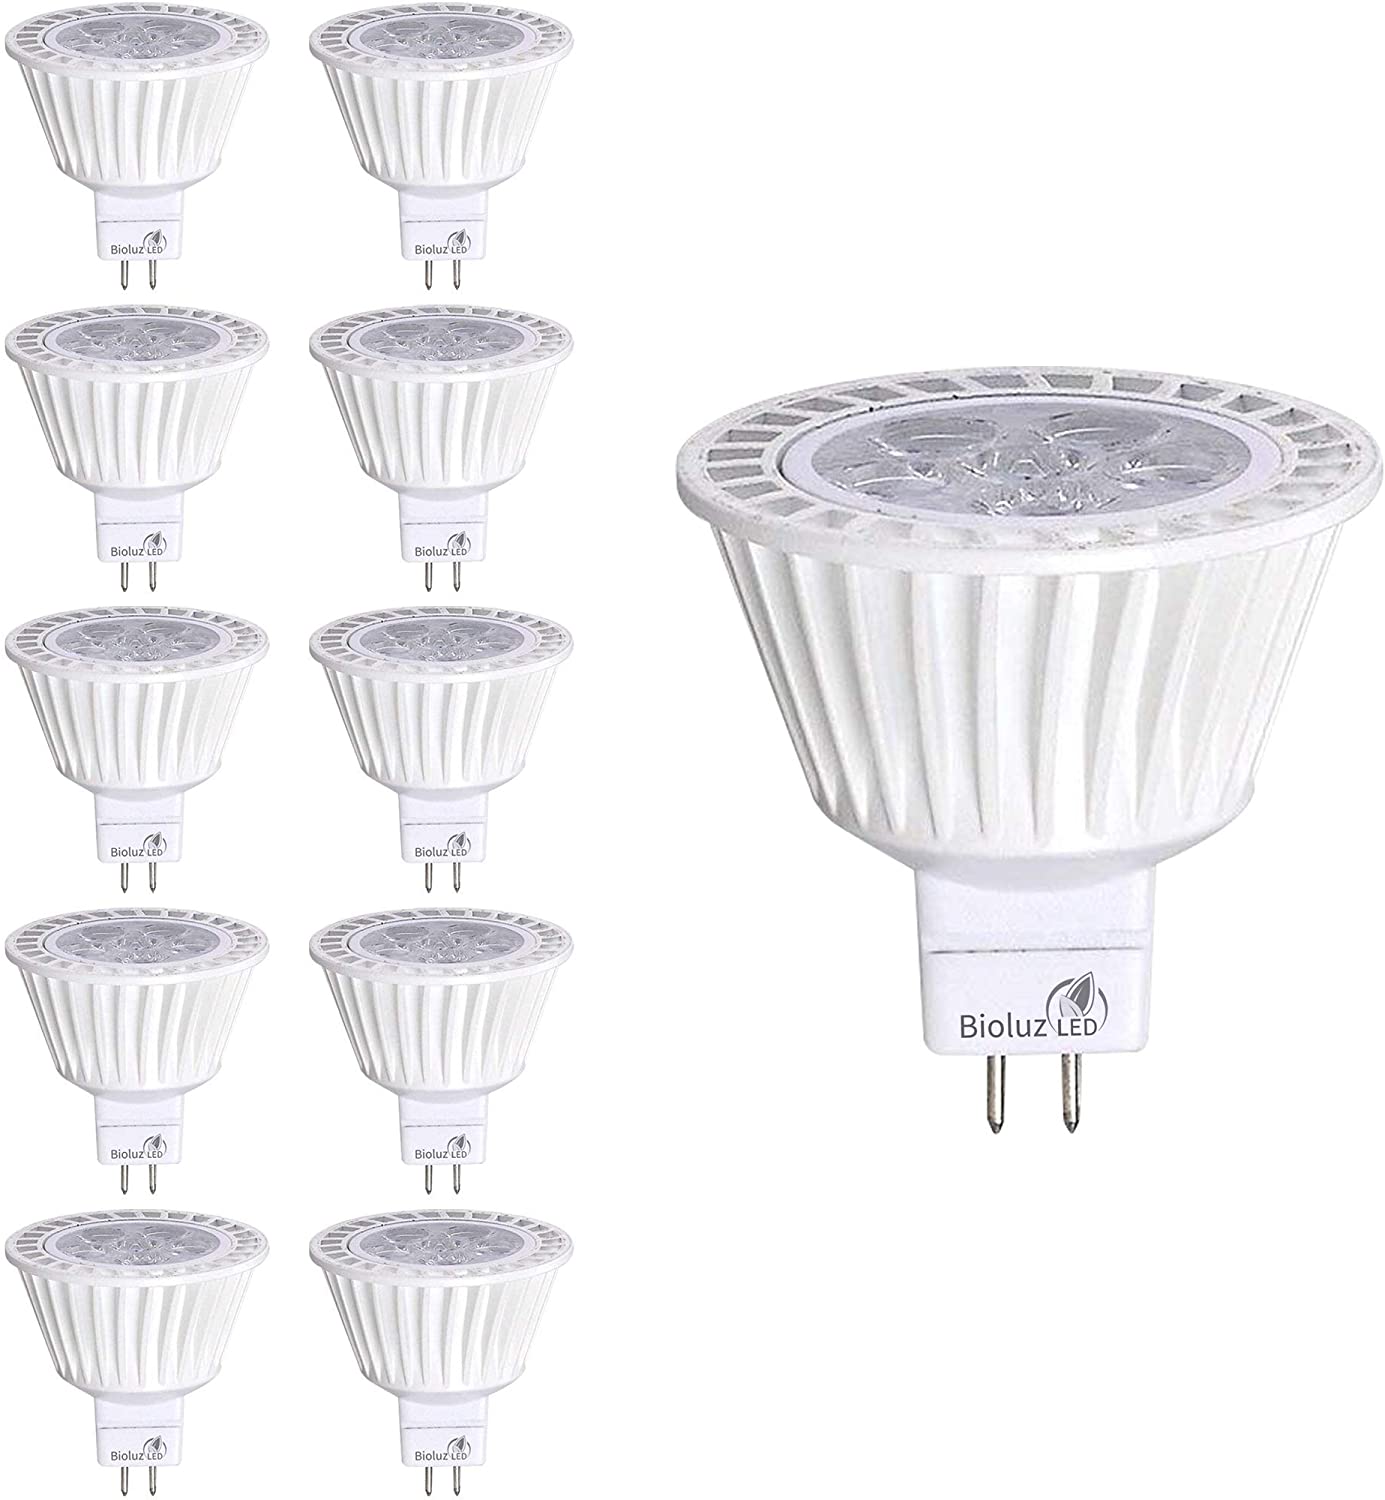 Bioluz LED MR16 LED Bulb Dimmable 50W Halogen Replacement